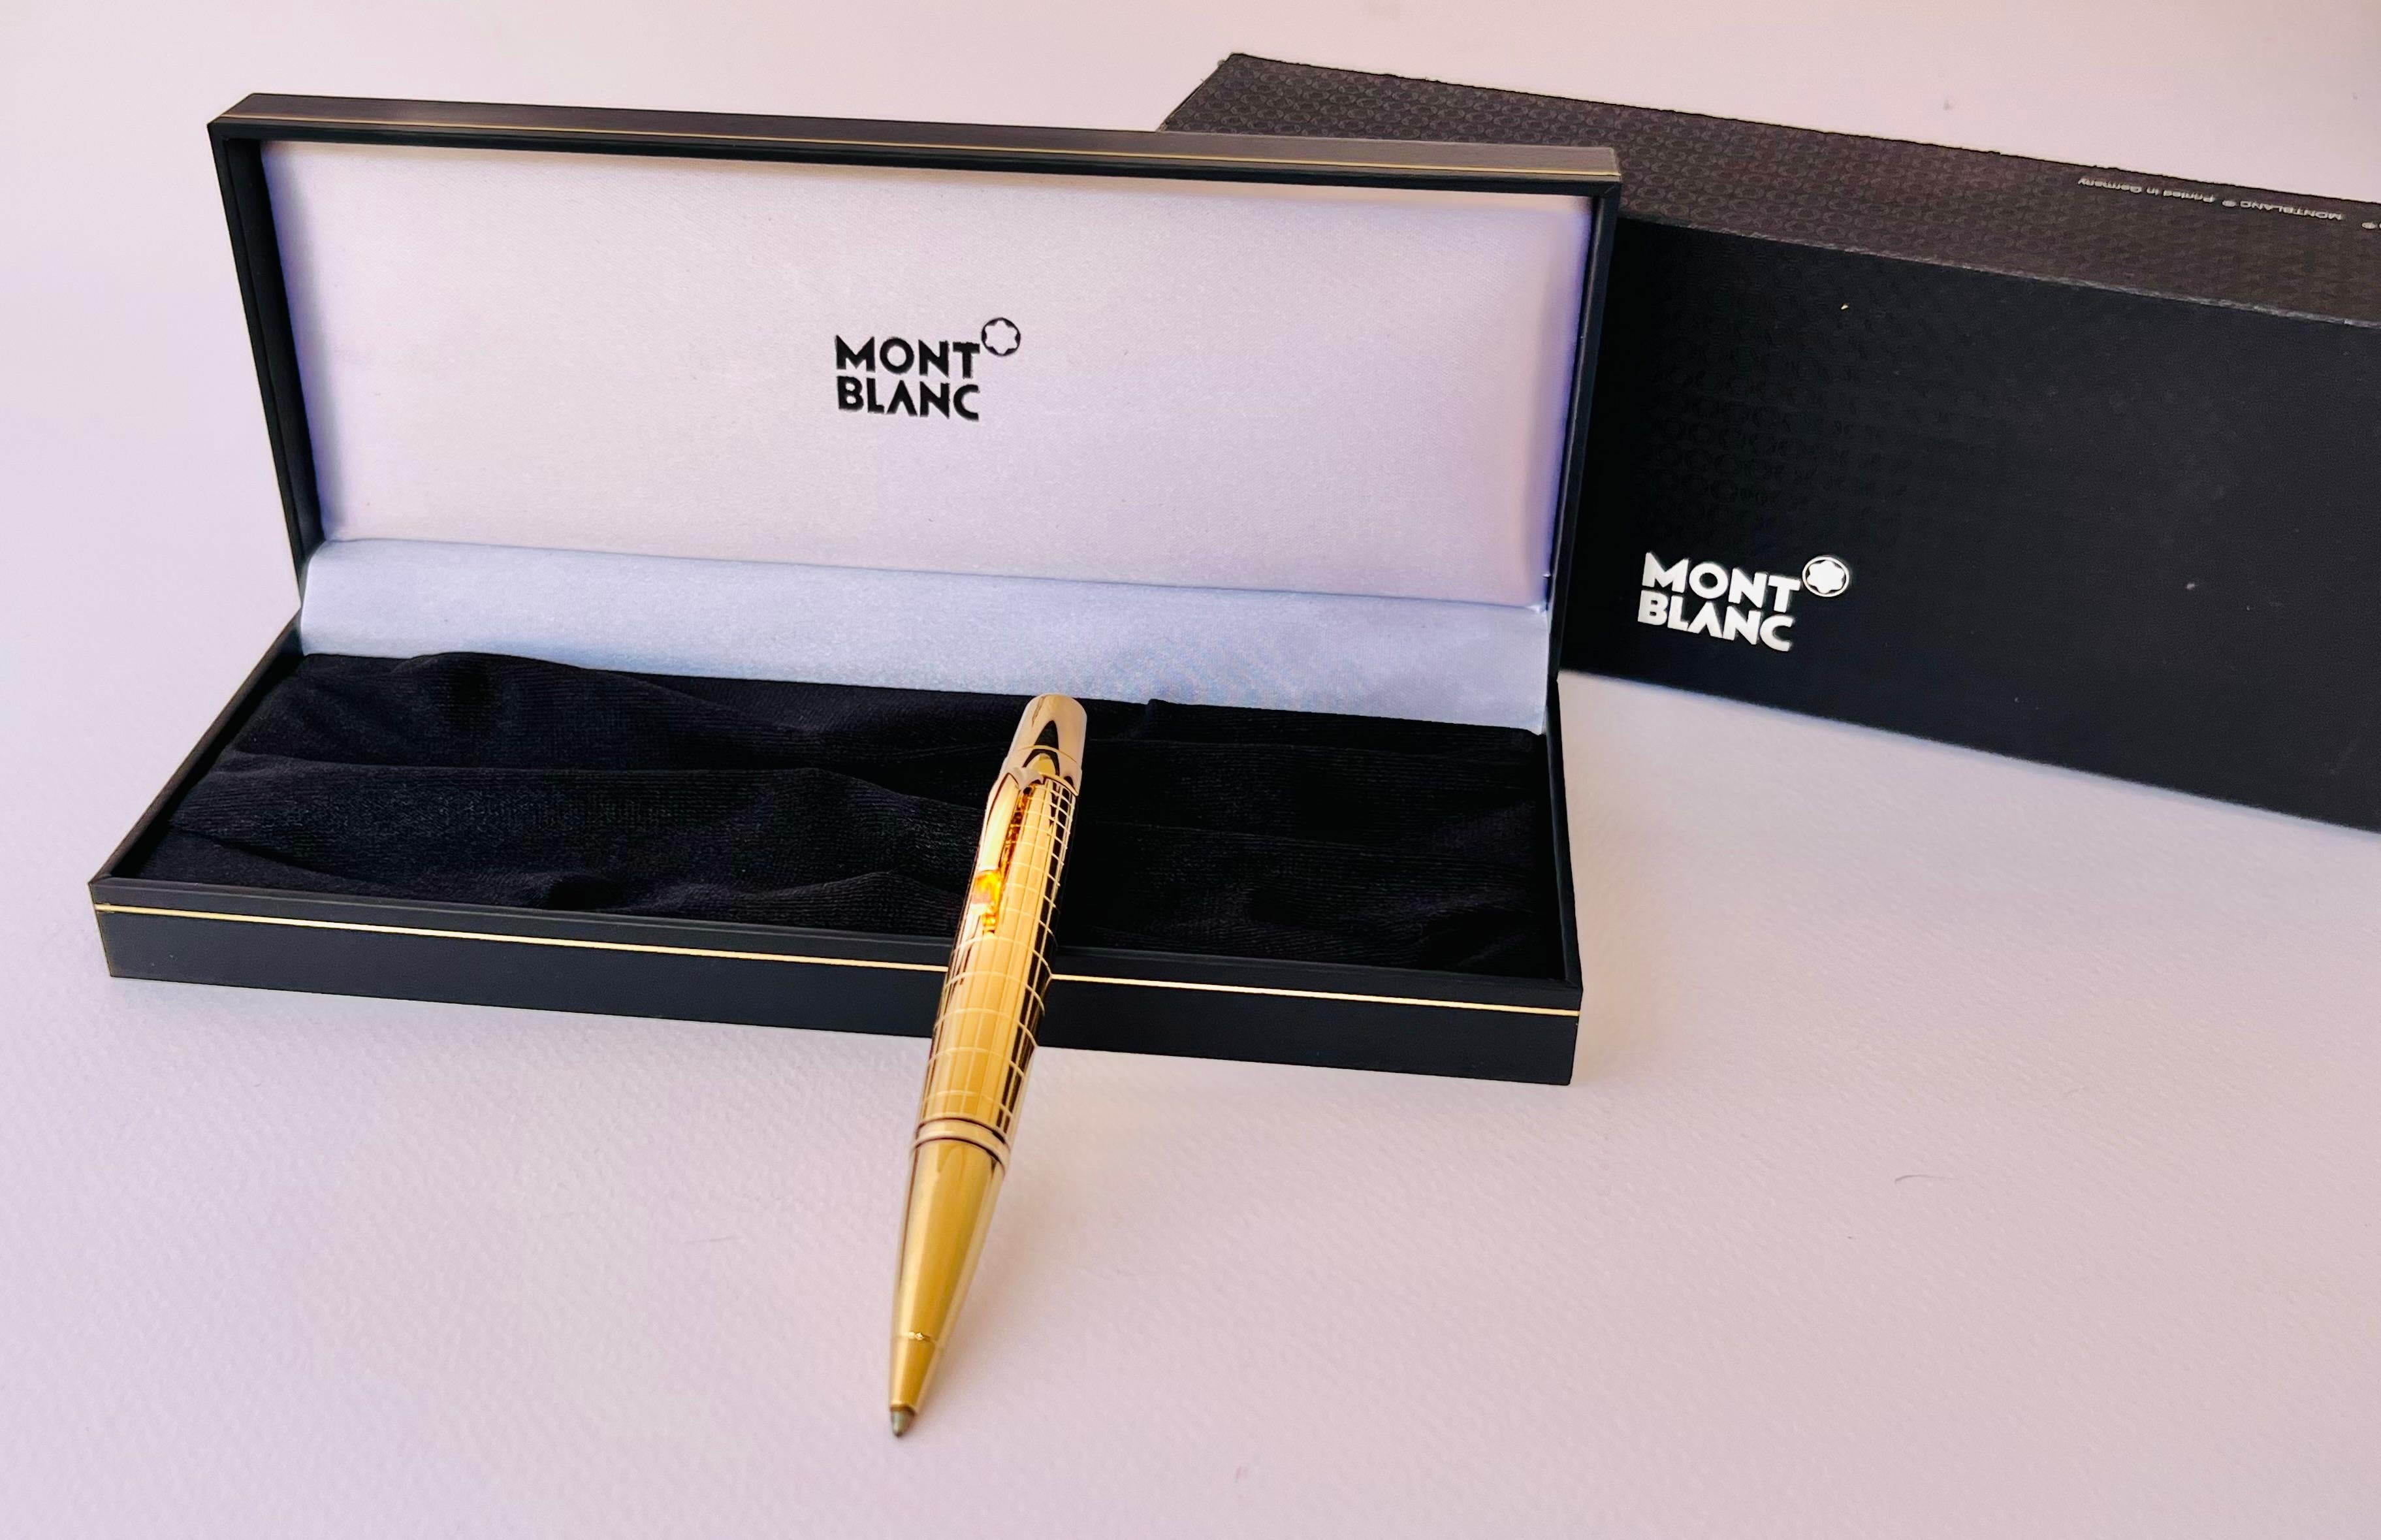 For your consideration Ultra Rare Montblanc Boheme Gold Plated Citrine Ballpoint
Package Contain two Montblanc Pens Boheme Gold
Genuine Box
Outer Packaging
Service Guide Booklet

Details:

Condition : New Never Used Please Check the pics

Clip: